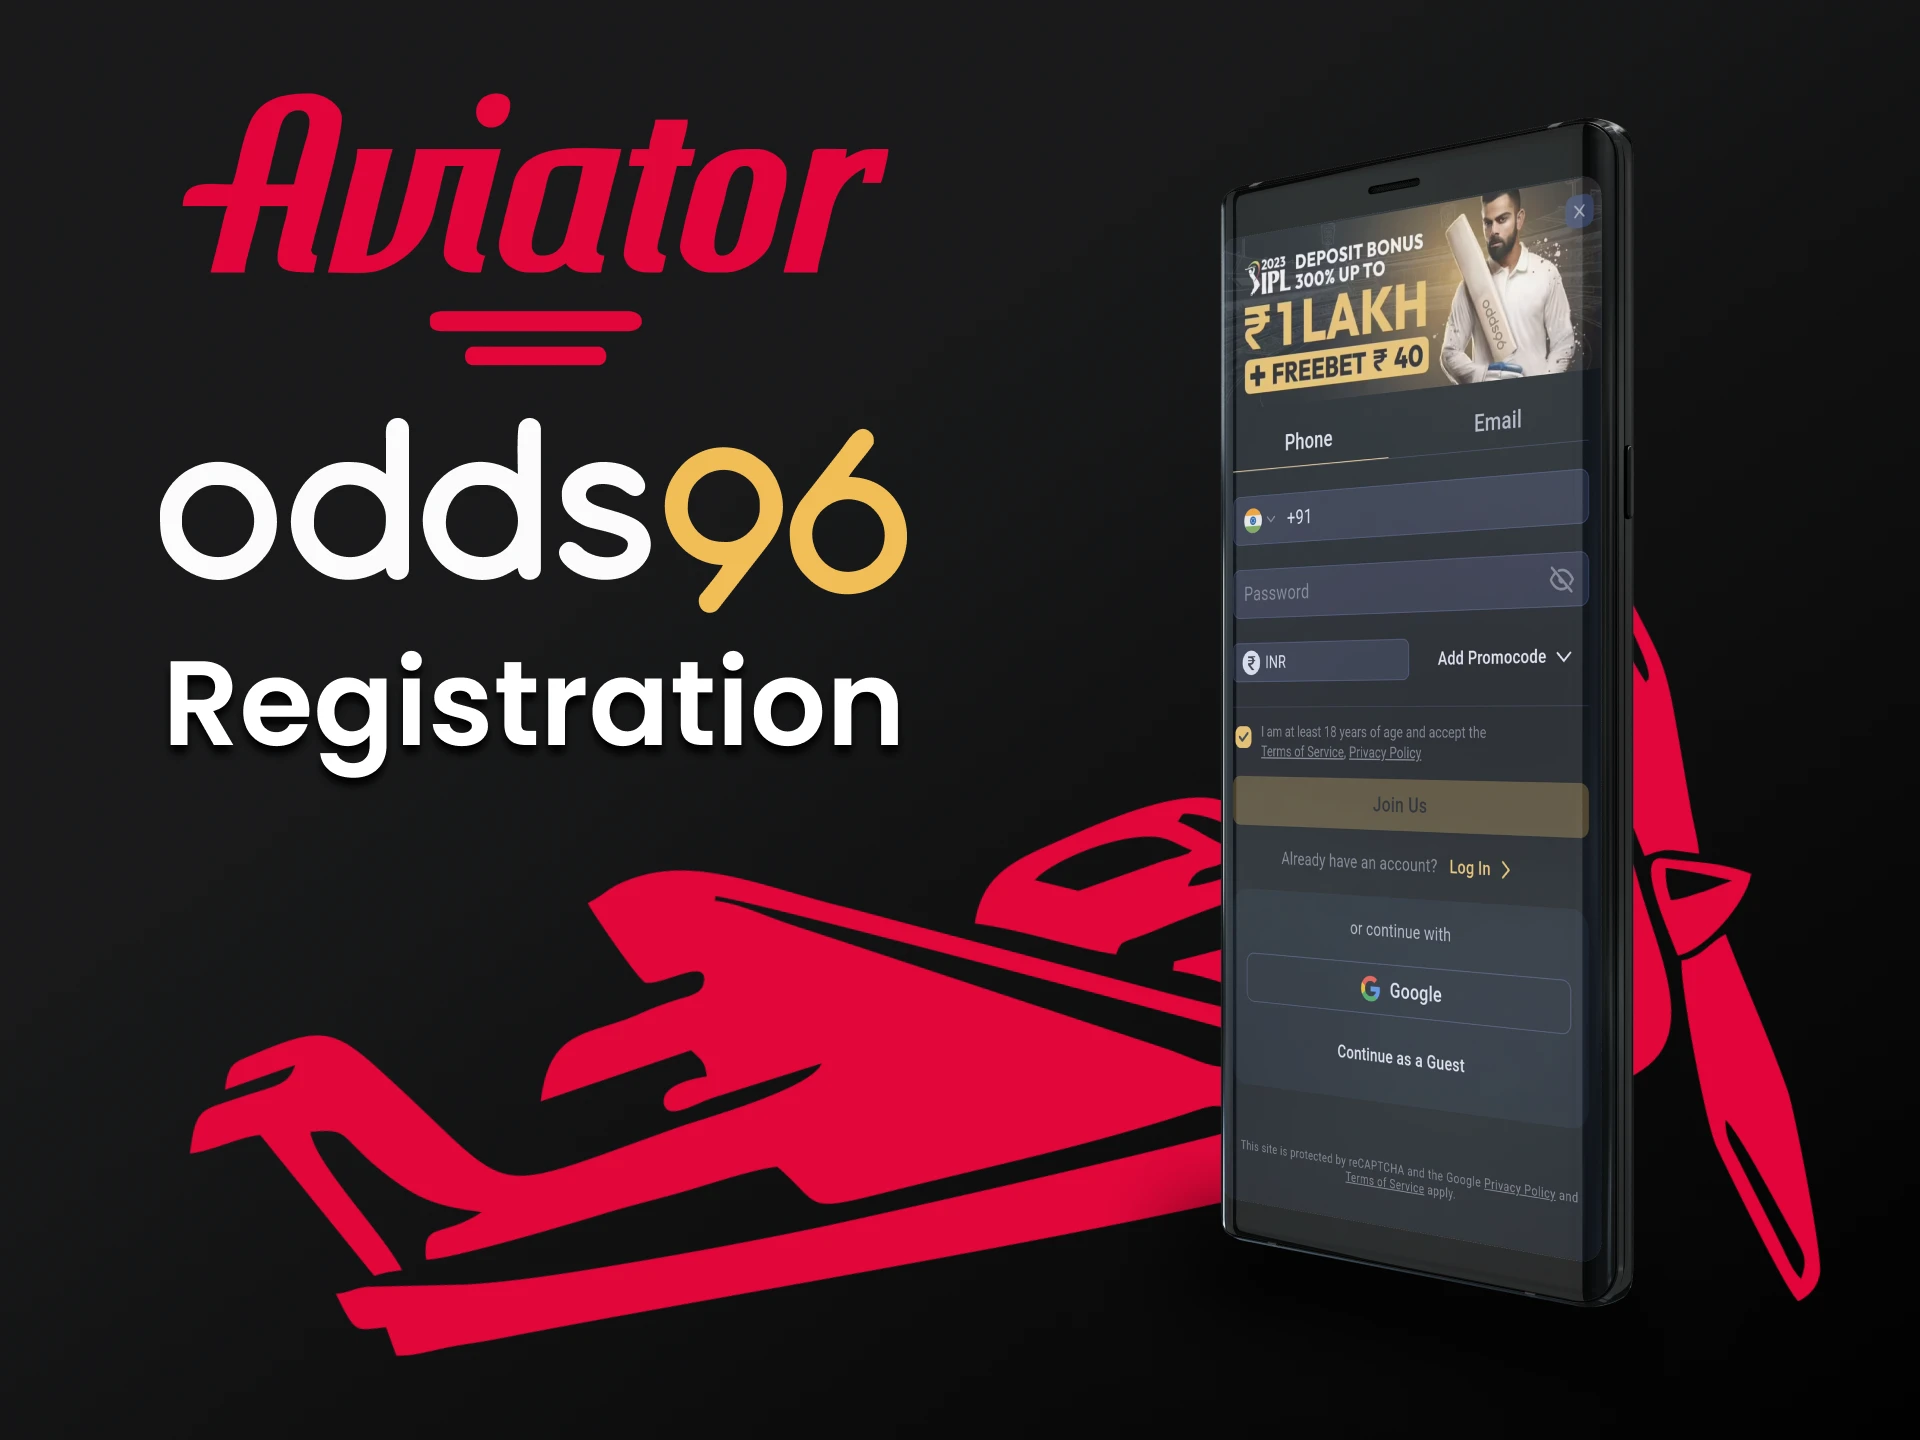 Sign up to the Odds96 app to play Aviator.